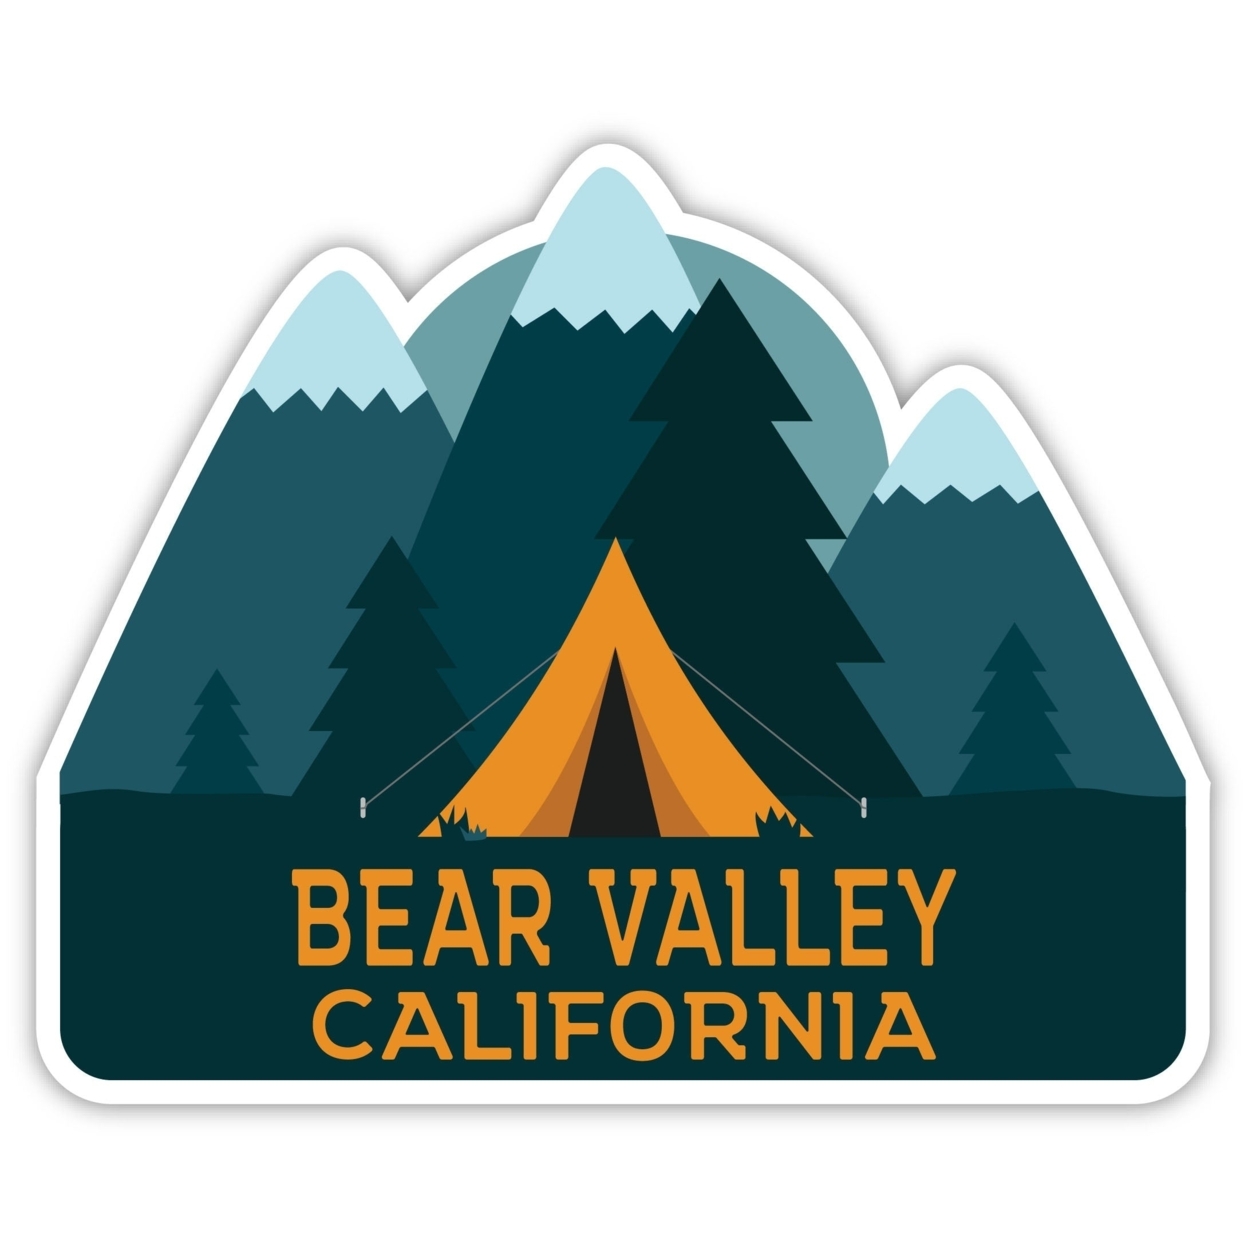 Bear Valley California Souvenir Decorative Stickers (Choose Theme And Size) - Single Unit, 2-Inch, Tent